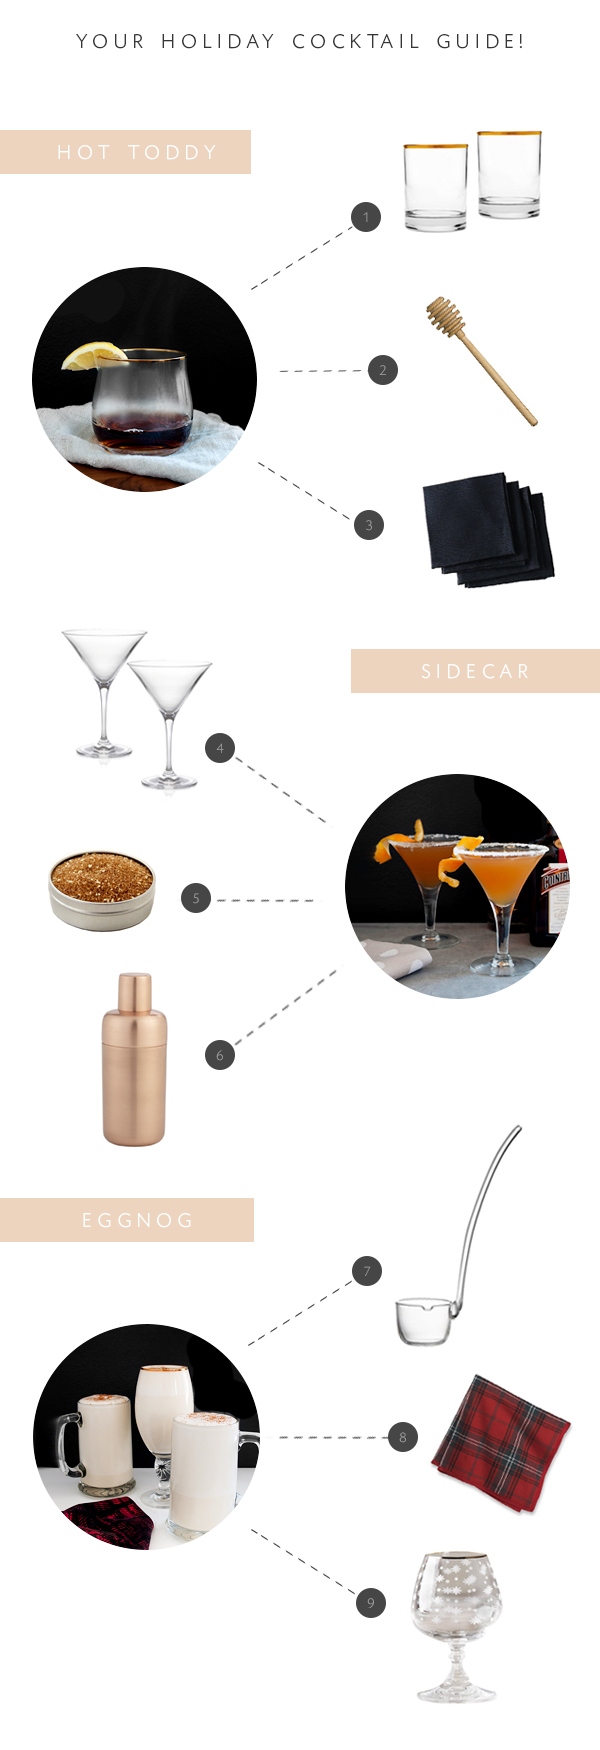 our guide to classic holiday cocktail recipes and what glassware to pair them with | via coco+kelley